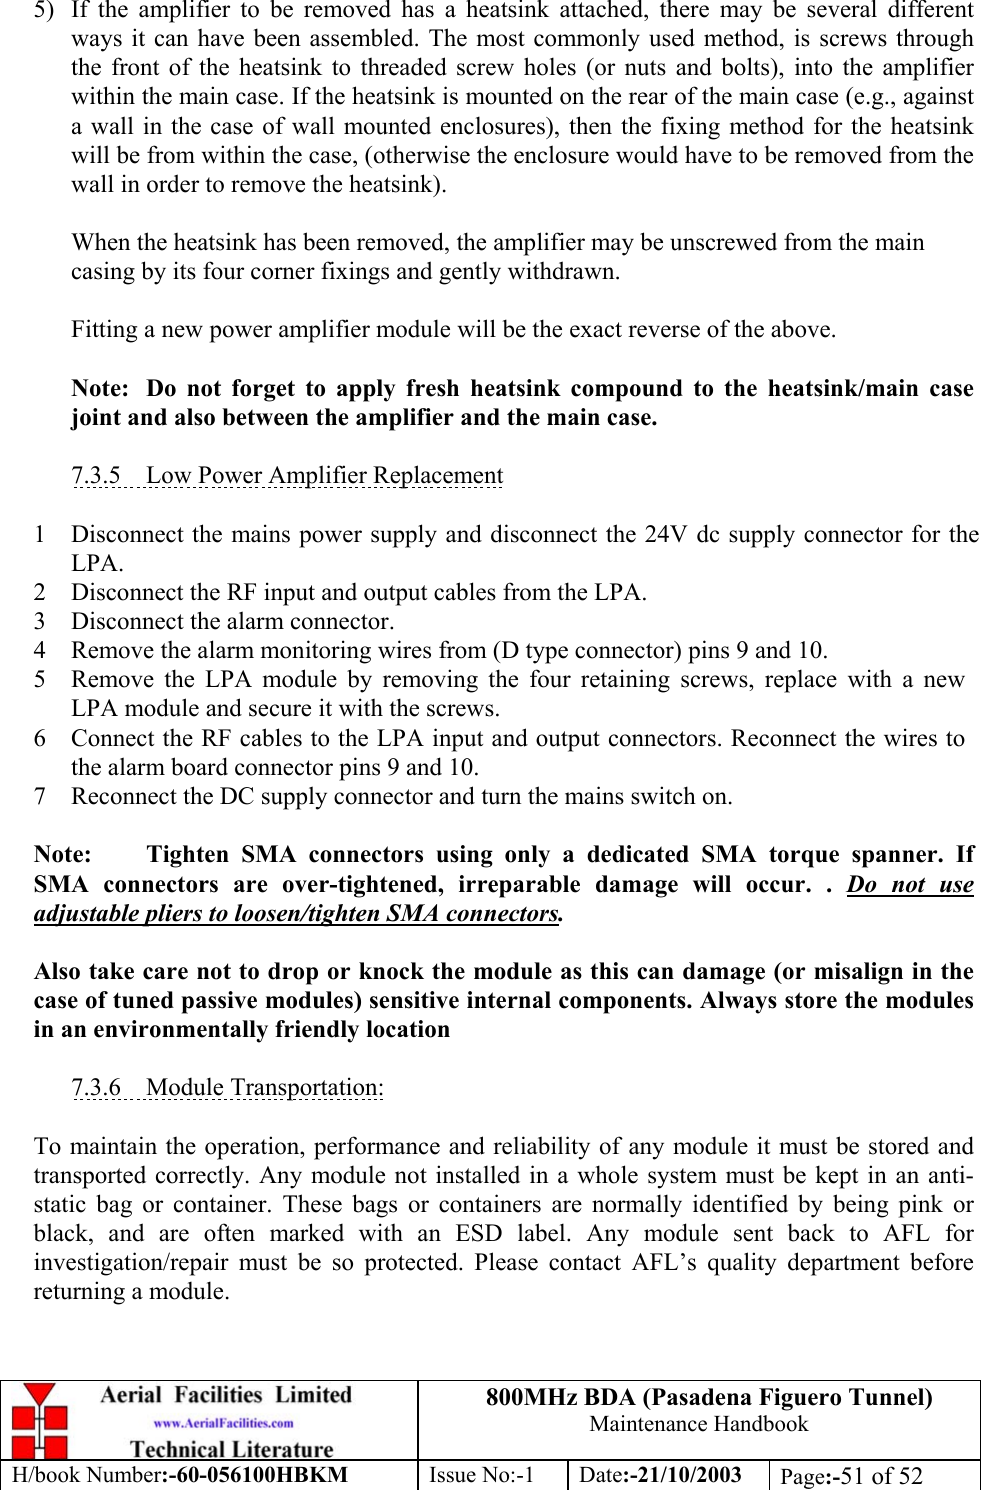 800MHz BDA (Pasadena Figuero Tunnel)Maintenance HandbookH/book Number:-60-056100HBKM Issue No:-1 Date:-21/10/2003 Page:-51 of 525) If the amplifier to be removed has a heatsink attached, there may be several differentways it can have been assembled. The most commonly used method, is screws throughthe front of the heatsink to threaded screw holes (or nuts and bolts), into the amplifierwithin the main case. If the heatsink is mounted on the rear of the main case (e.g., againsta wall in the case of wall mounted enclosures), then the fixing method for the heatsinkwill be from within the case, (otherwise the enclosure would have to be removed from thewall in order to remove the heatsink).When the heatsink has been removed, the amplifier may be unscrewed from the maincasing by its four corner fixings and gently withdrawn.Fitting a new power amplifier module will be the exact reverse of the above.Note: Do not forget to apply fresh heatsink compound to the heatsink/main casejoint and also between the amplifier and the main case.7.3.5    Low Power Amplifier Replacement1 Disconnect the mains power supply and disconnect the 24V dc supply connector for theLPA.2 Disconnect the RF input and output cables from the LPA.3 Disconnect the alarm connector.4 Remove the alarm monitoring wires from (D type connector) pins 9 and 10.5 Remove the LPA module by removing the four retaining screws, replace with a newLPA module and secure it with the screws.6 Connect the RF cables to the LPA input and output connectors. Reconnect the wires tothe alarm board connector pins 9 and 10.7 Reconnect the DC supply connector and turn the mains switch on.Note: Tighten SMA connectors using only a dedicated SMA torque spanner. IfSMA connectors are over-tightened, irreparable damage will occur. . Do not useadjustable pliers to loosen/tighten SMA connectors.Also take care not to drop or knock the module as this can damage (or misalign in thecase of tuned passive modules) sensitive internal components. Always store the modulesin an environmentally friendly location7.3.6    Module Transportation:To maintain the operation, performance and reliability of any module it must be stored andtransported correctly. Any module not installed in a whole system must be kept in an anti-static bag or container. These bags or containers are normally identified by being pink orblack, and are often marked with an ESD label. Any module sent back to AFL forinvestigation/repair must be so protected. Please contact AFL’s quality department beforereturning a module.